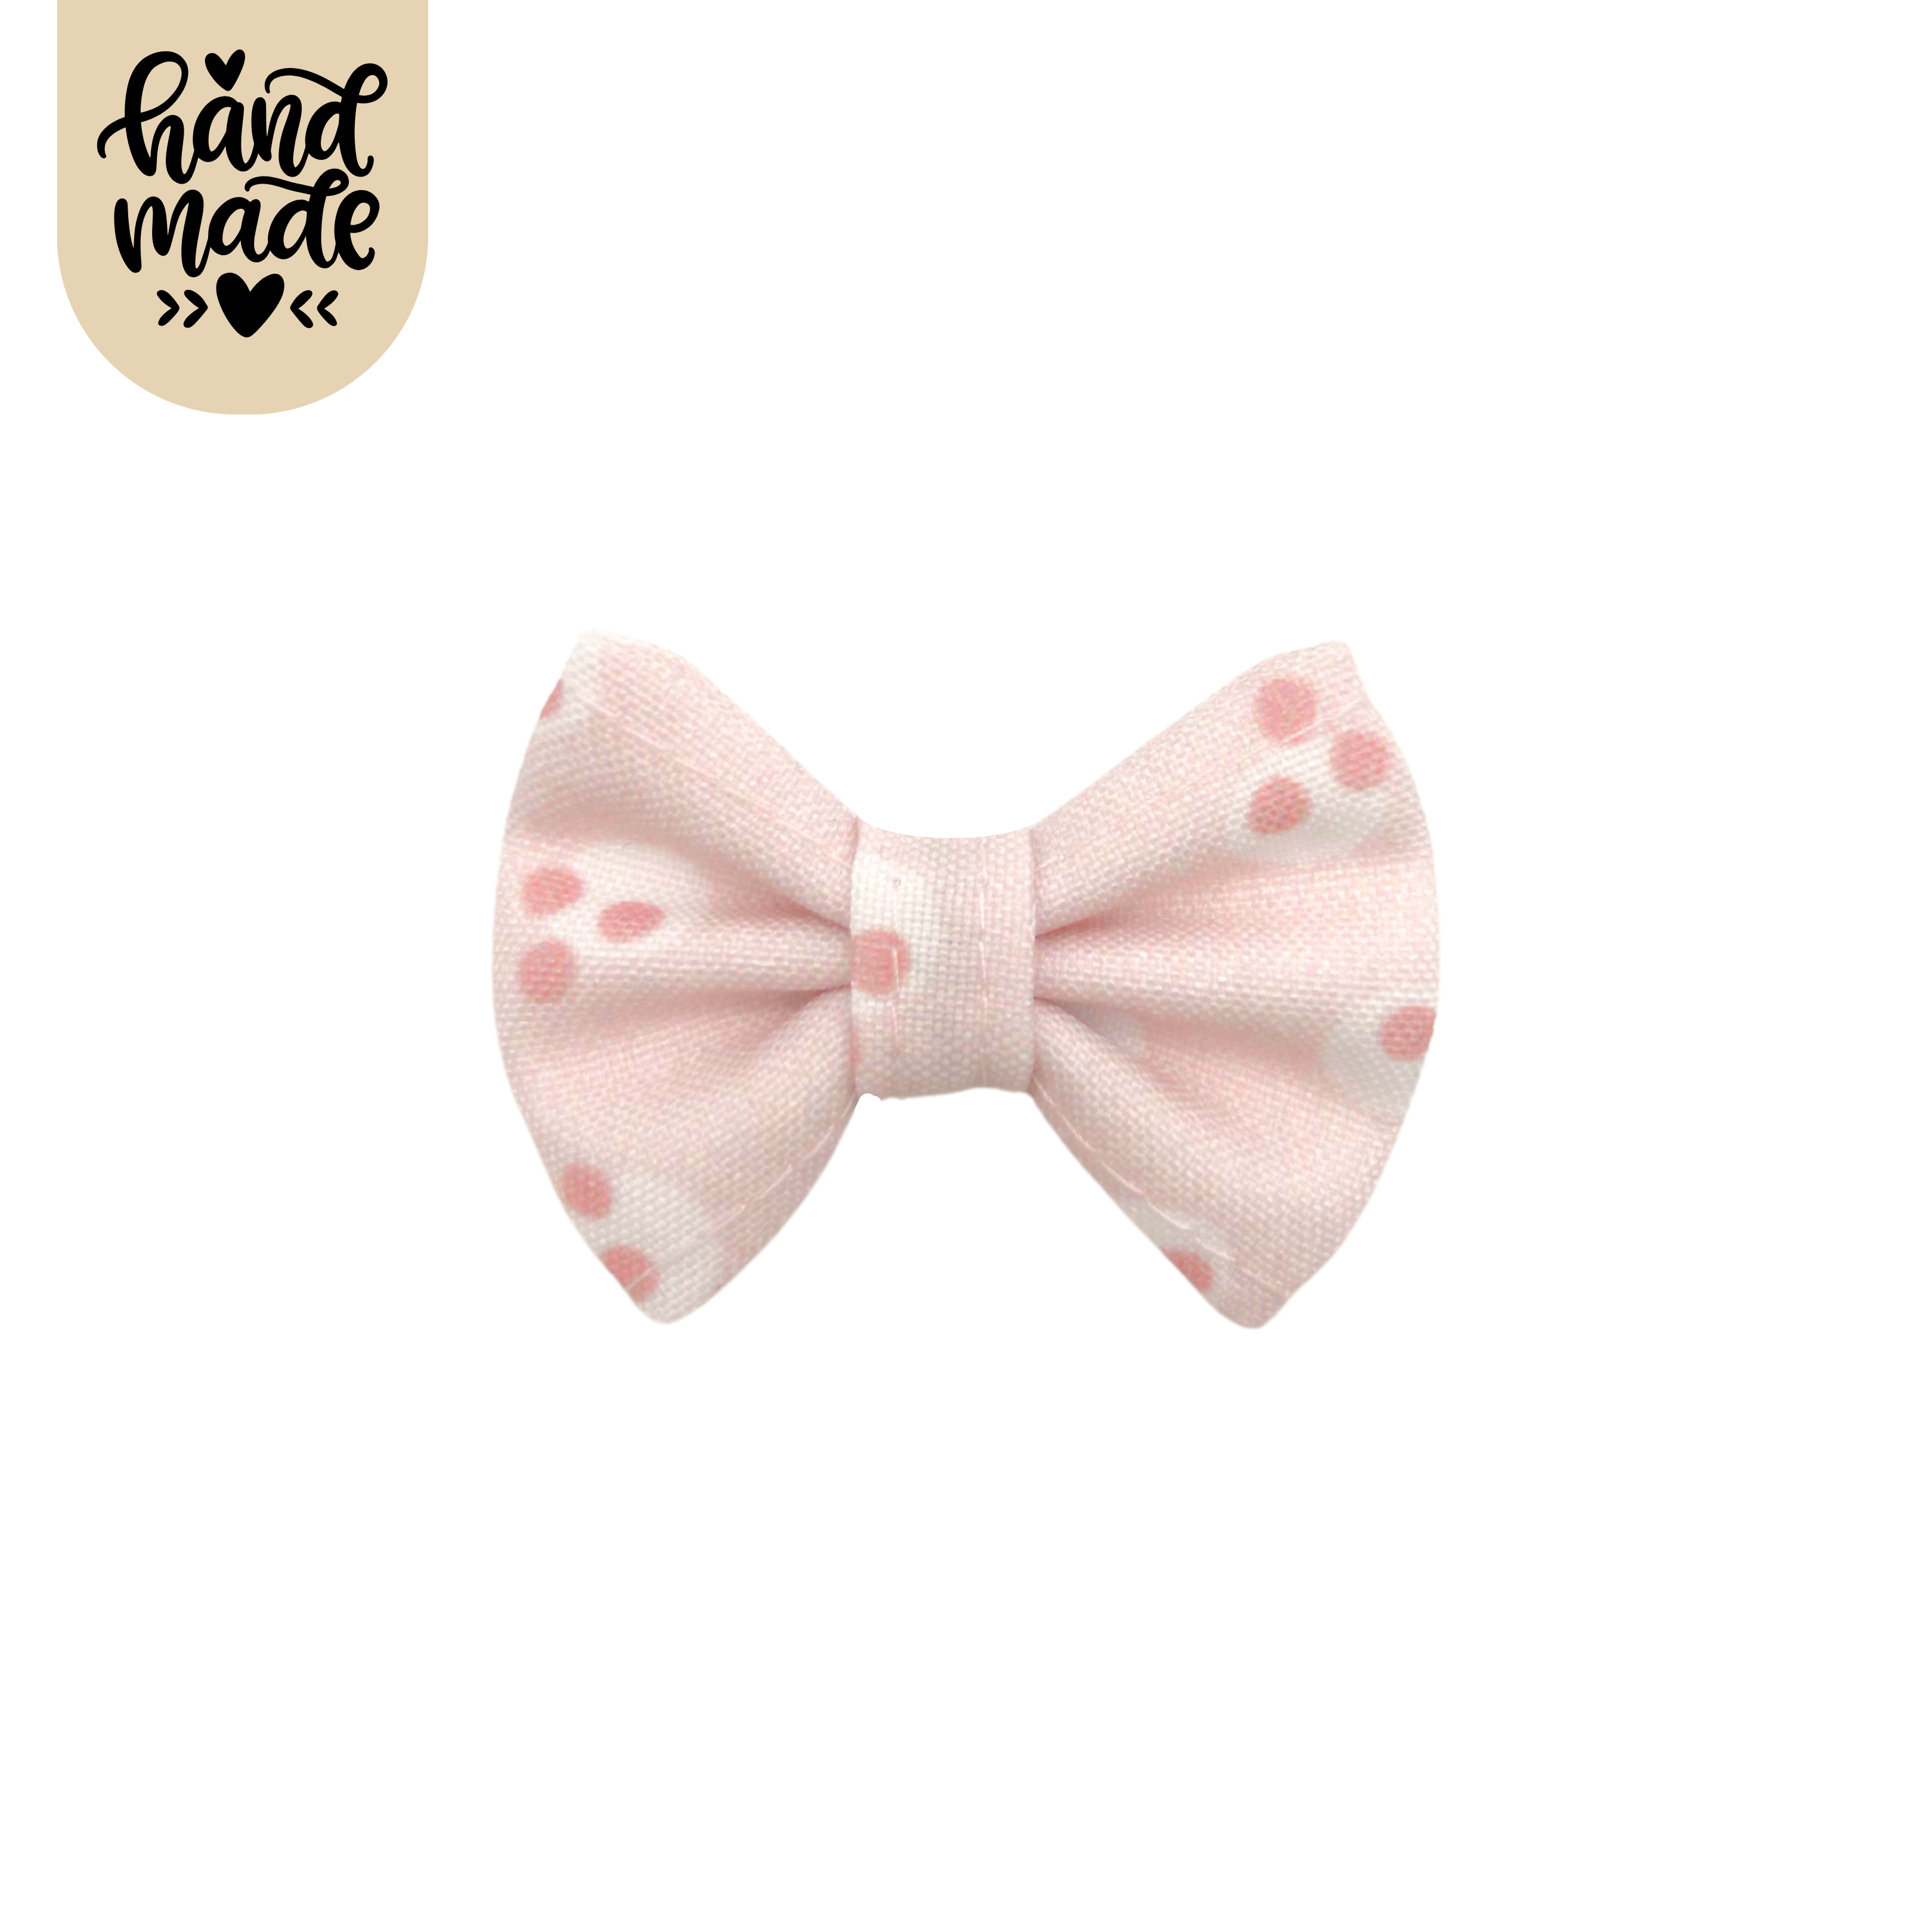 Small Bow Clip - Cotton Candy